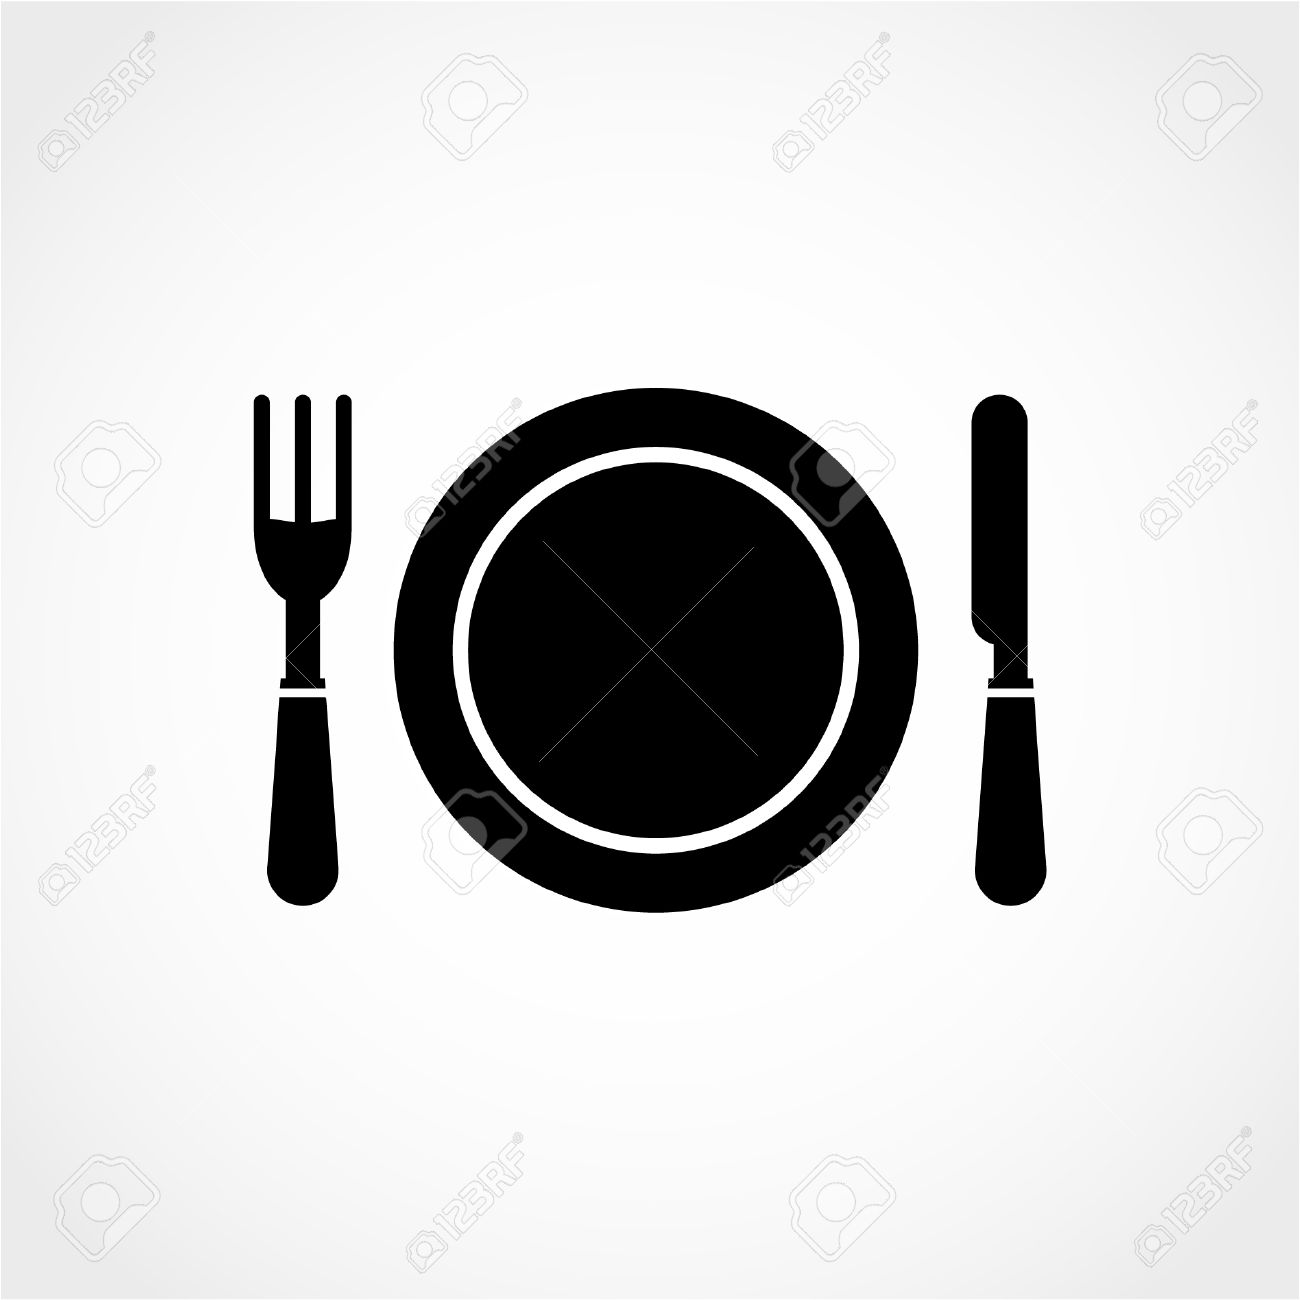 Two icons with plate, fork, spoon, knife on red and white 